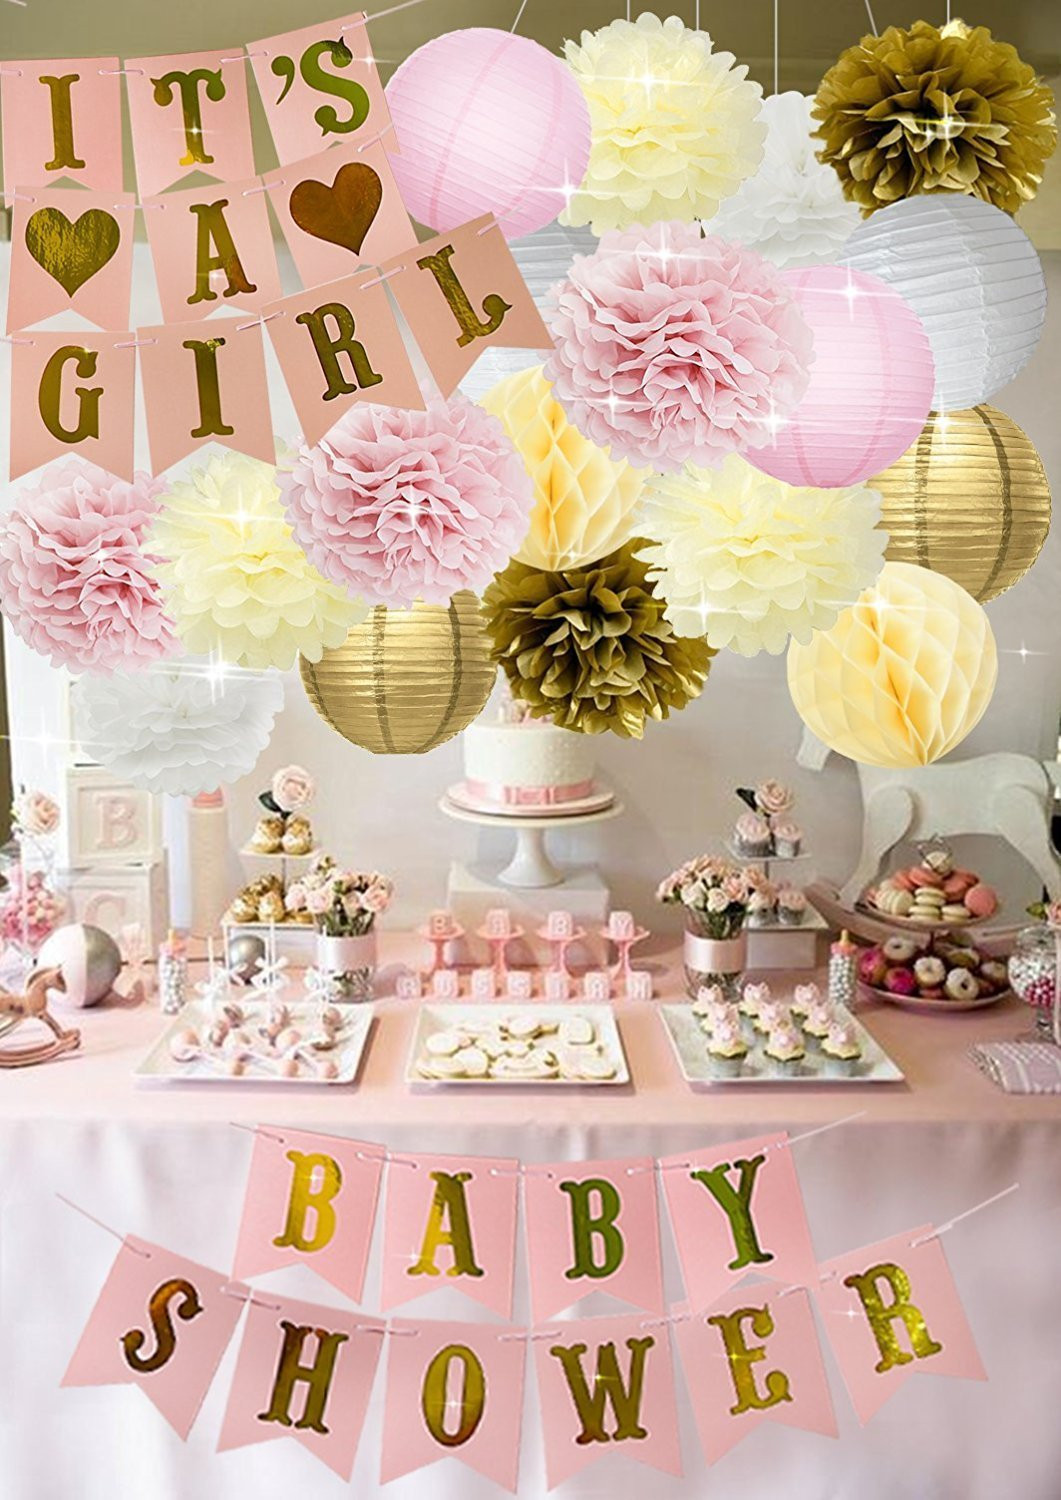 Baby Shower Decor Ideas For Girls
 Baby Shower Decorations BABY SHOWER IT S A GIRL Garland